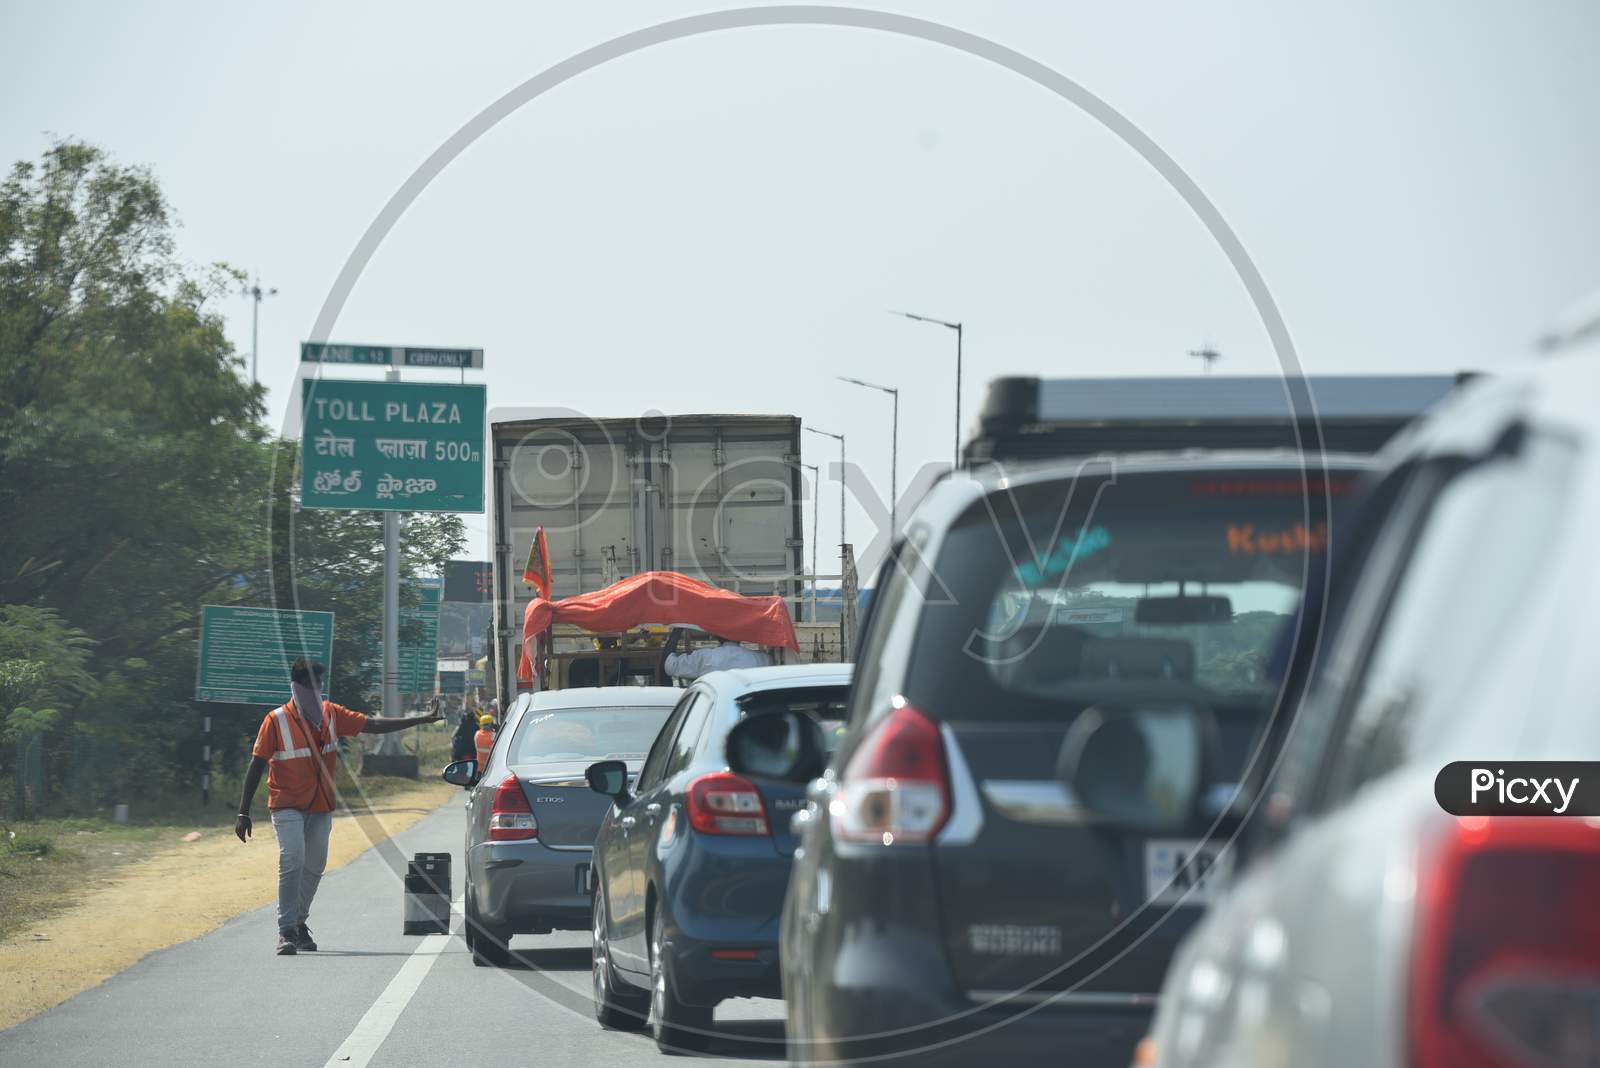 Cash Only lane at a Toll Plaza with huge traffic jam